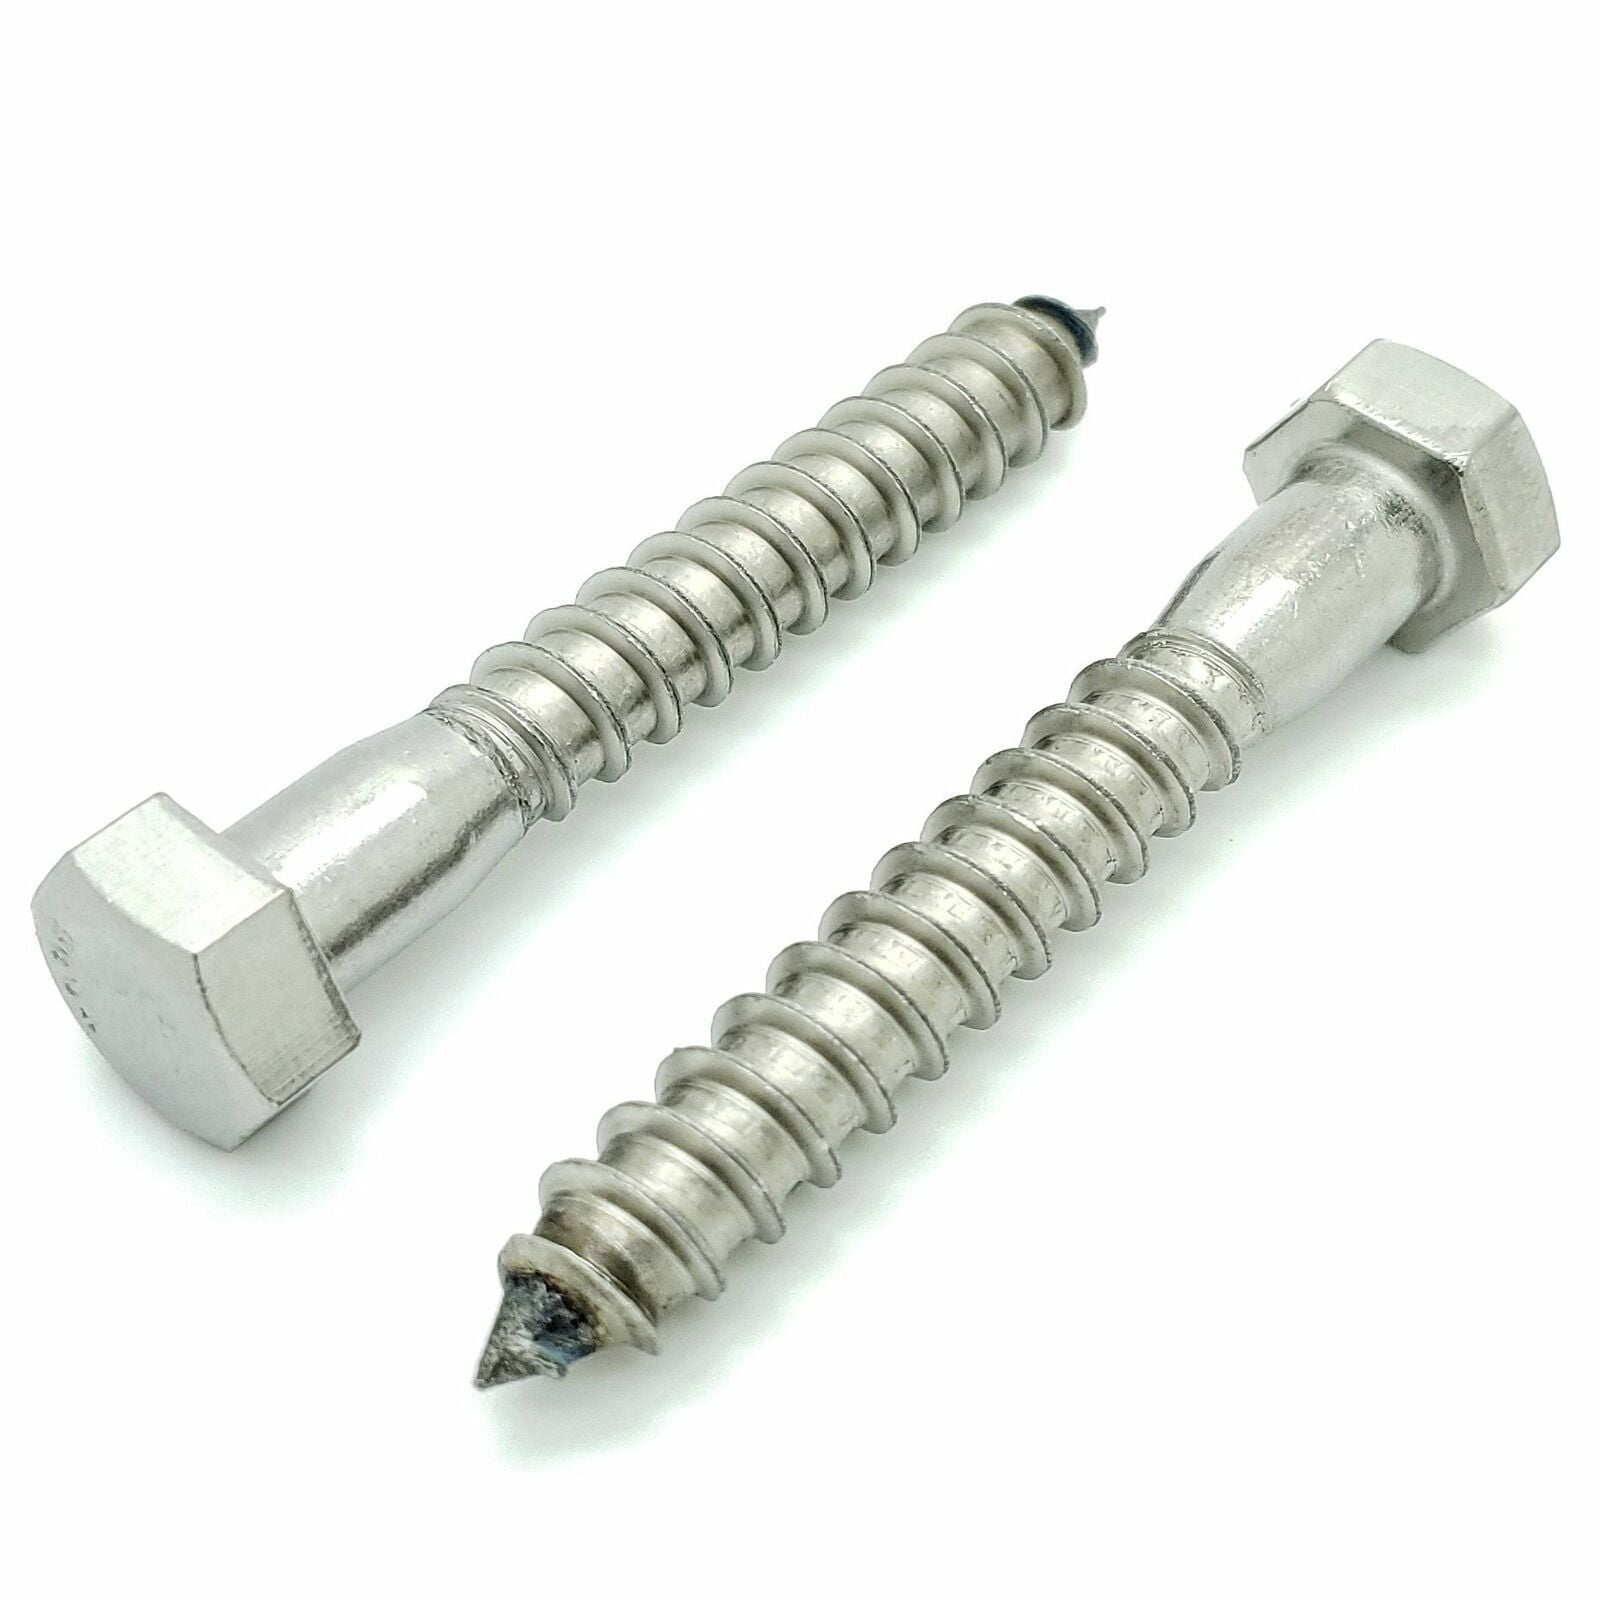 Qty 10 1/2 x 8" Stainless Steel Hex Lag Screws 